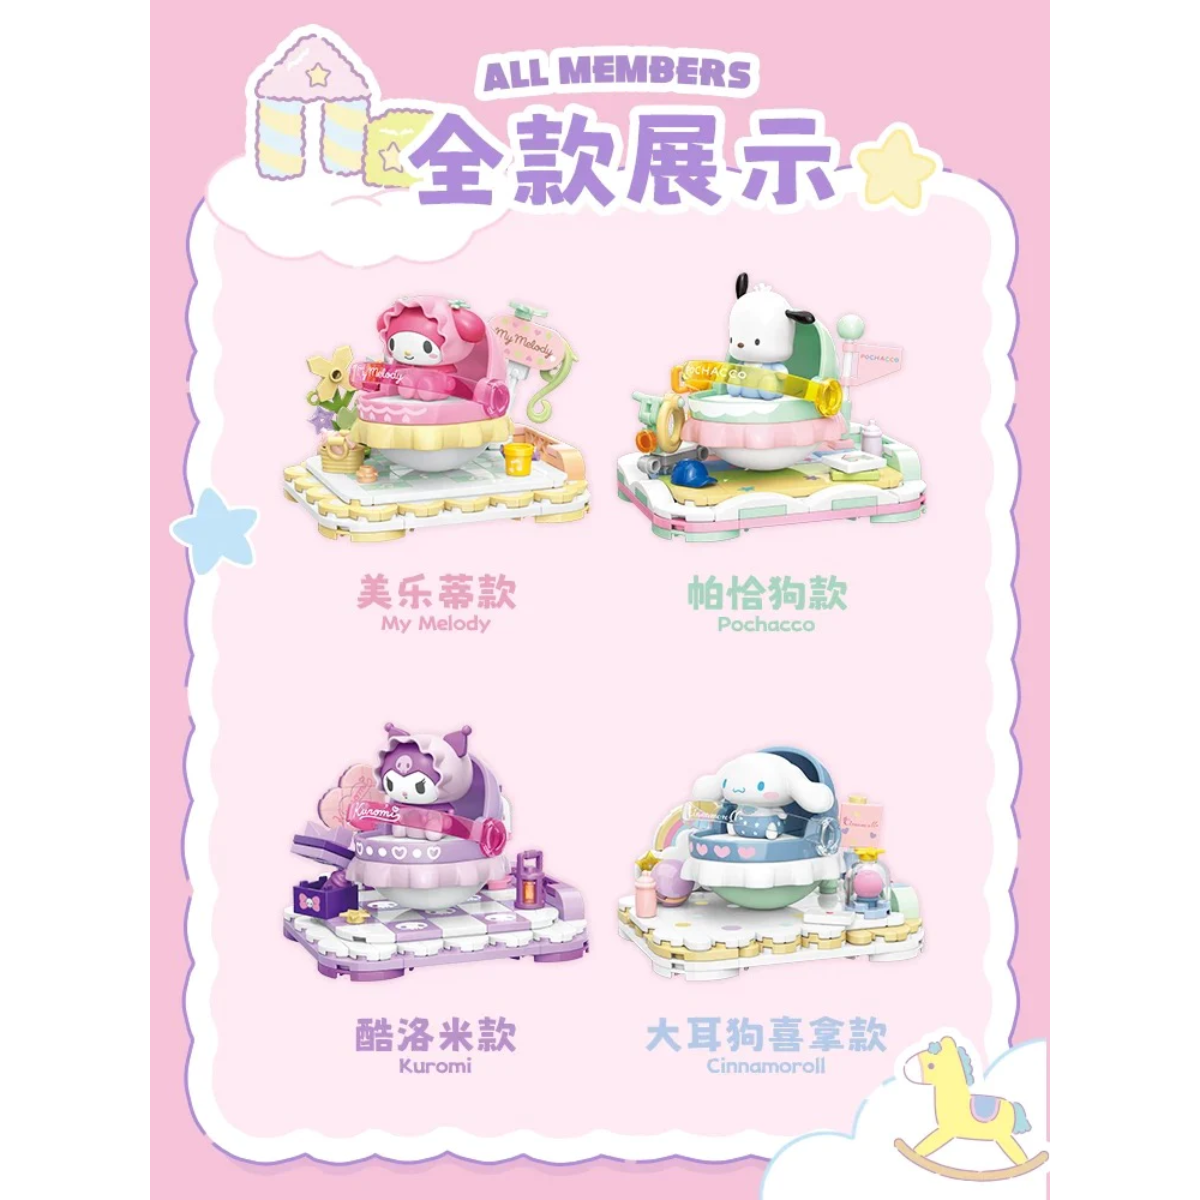 TopToy x Sanrio Characters Shacky Bed Building Blocks Series-Cinnamoroll-TopToy-Ace Cards & Collectibles